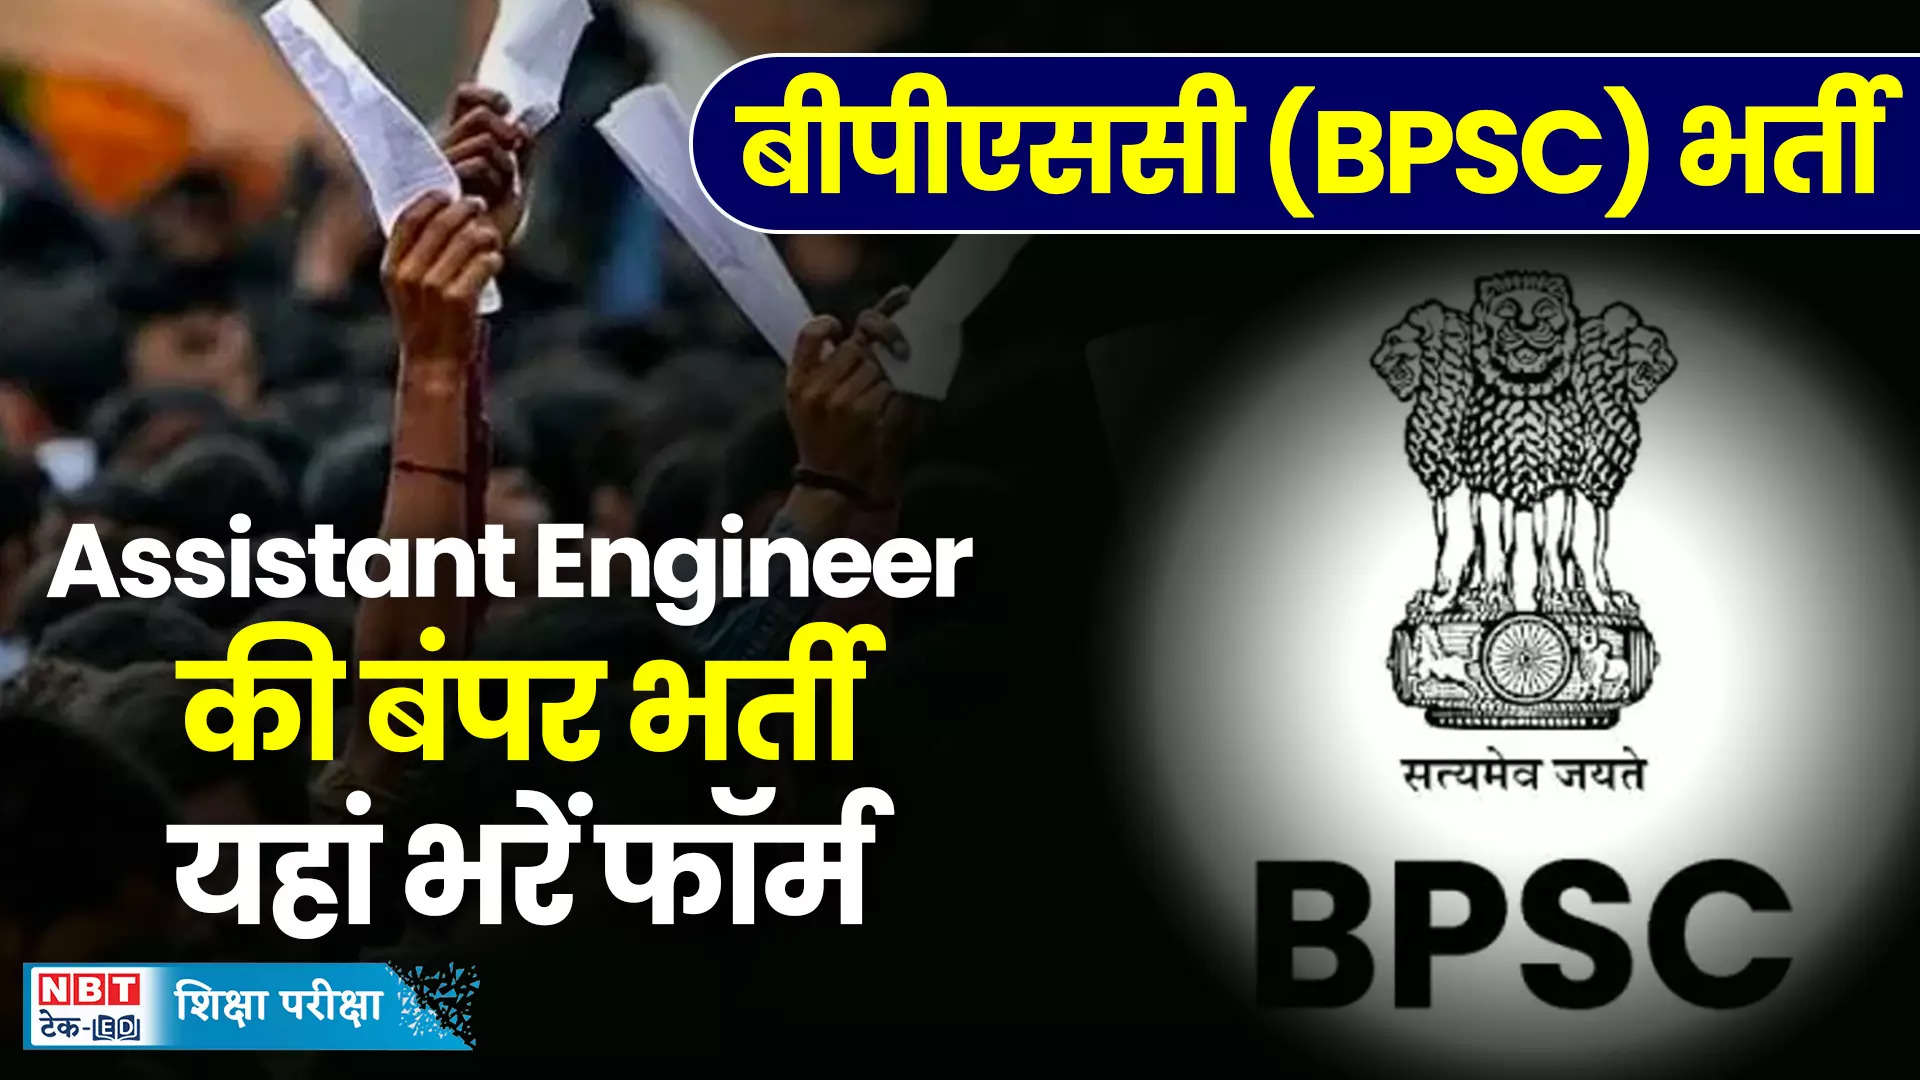 BPSC AE 2024: The last date for this government recruitment in Bihar is very near, fill the form here quickly